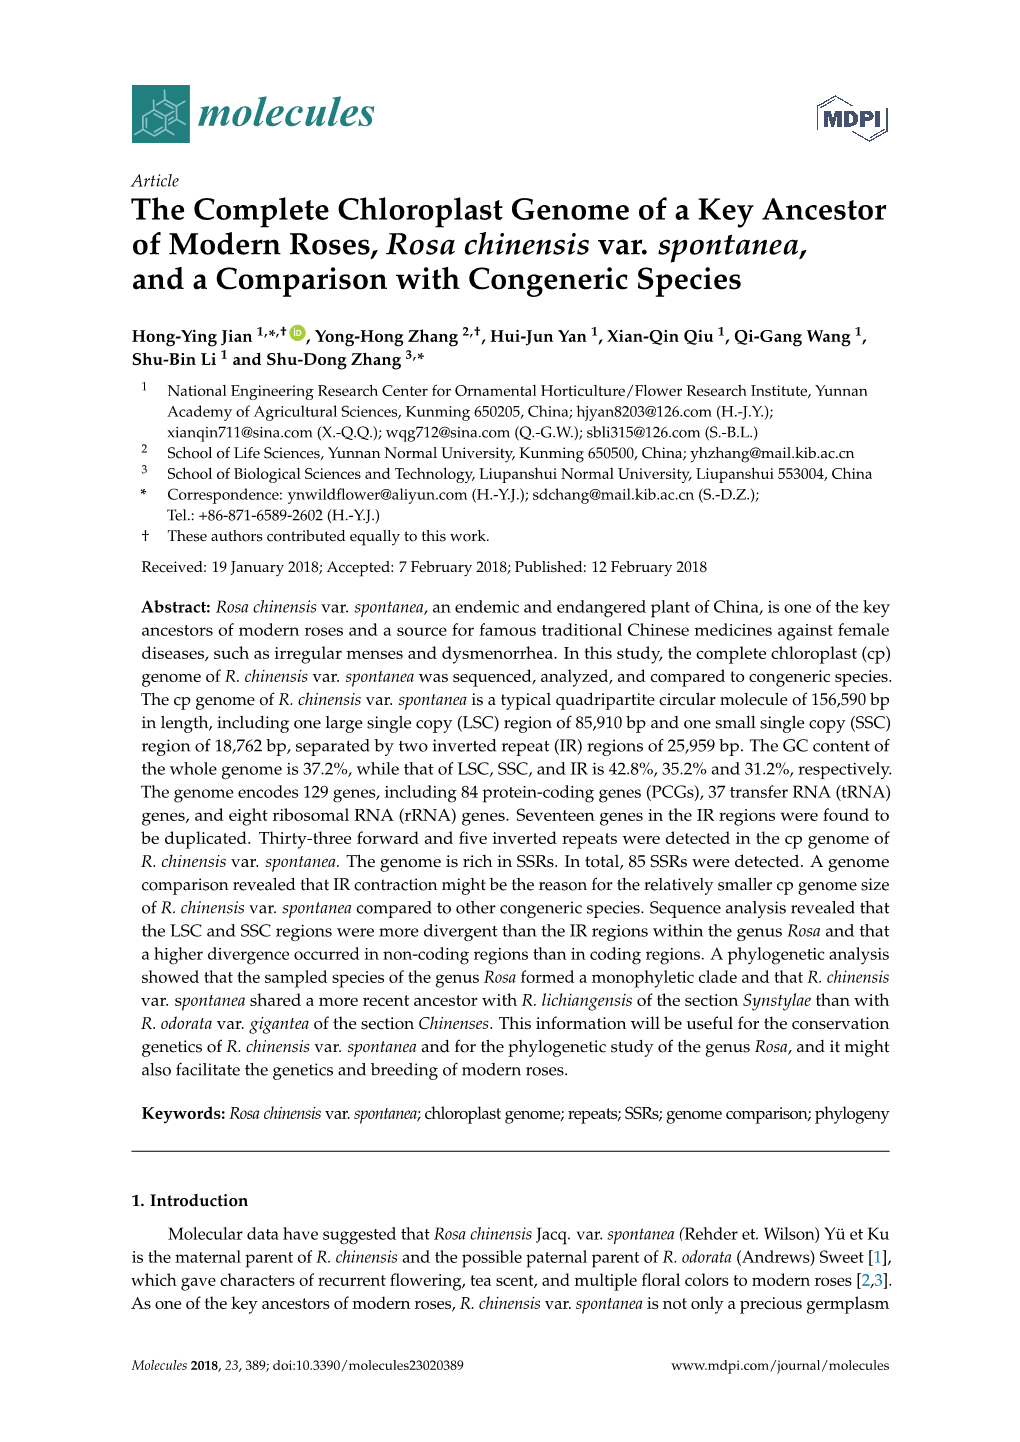 The Complete Chloroplast Genome of a Key Ancestor of Modern Roses, Rosa Chinensis Var